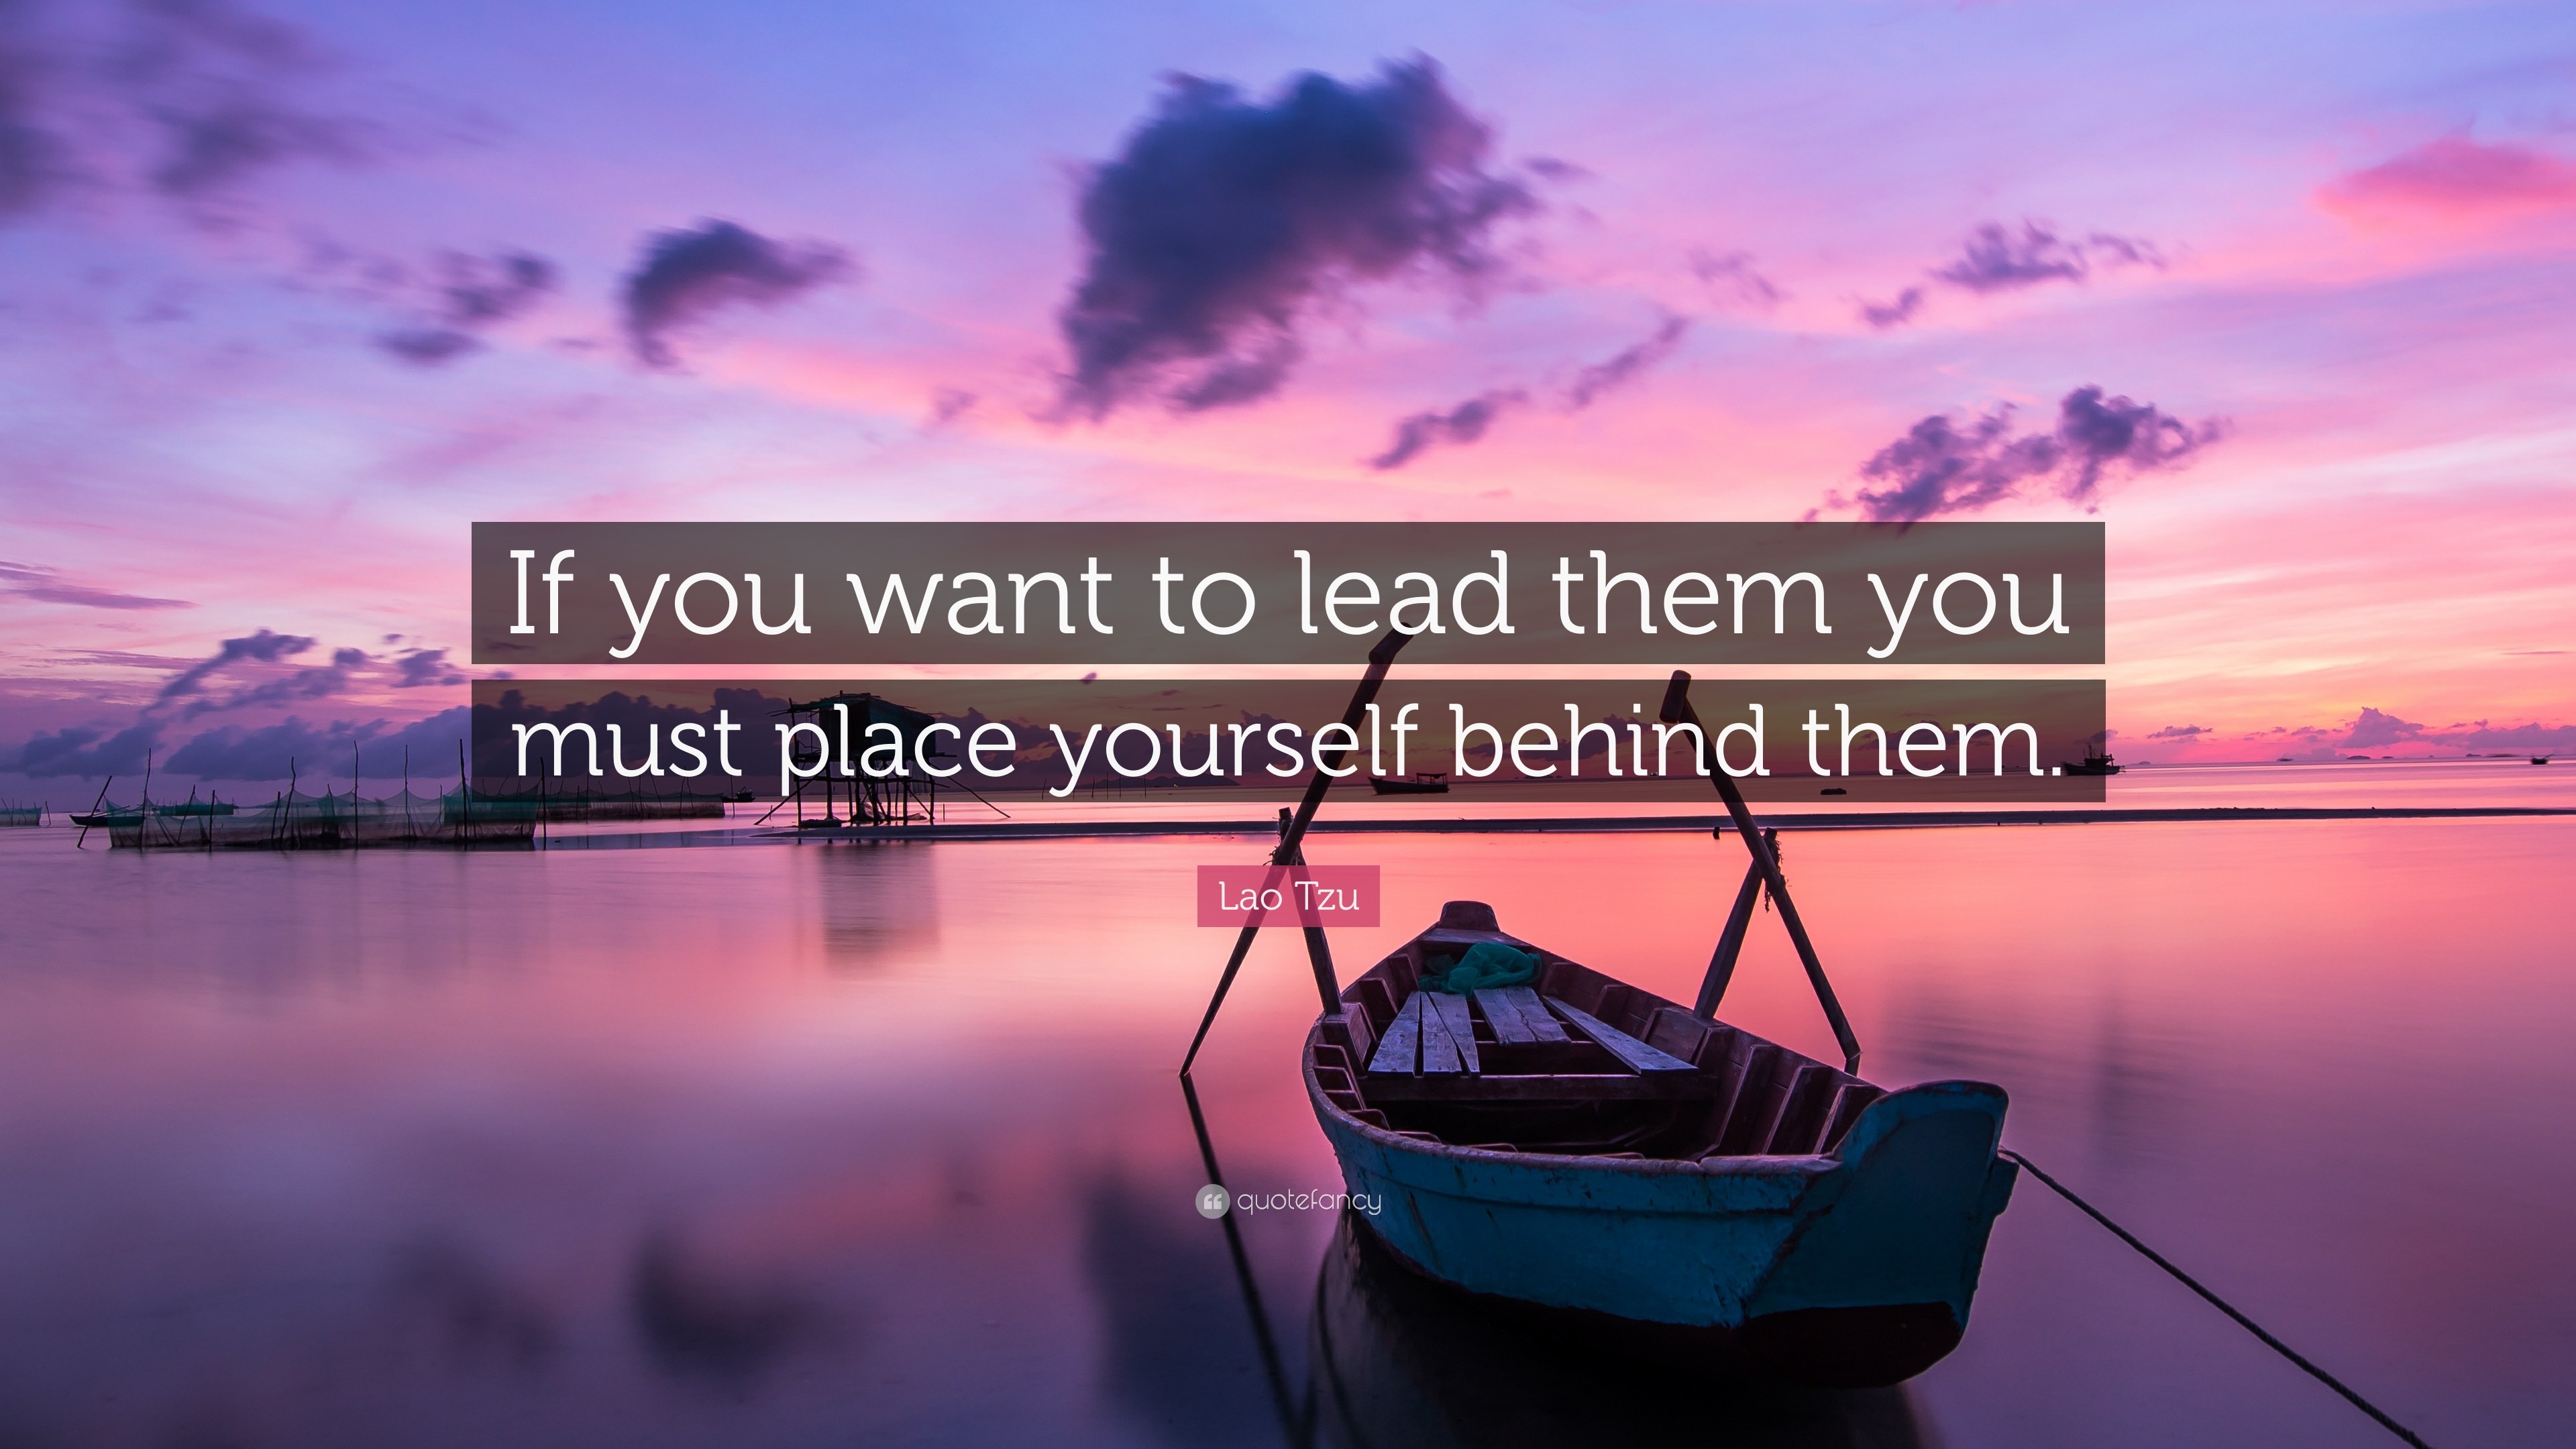 3840x2160 Lao Tzu Quote: “If you want to lead them you must place yourself behind